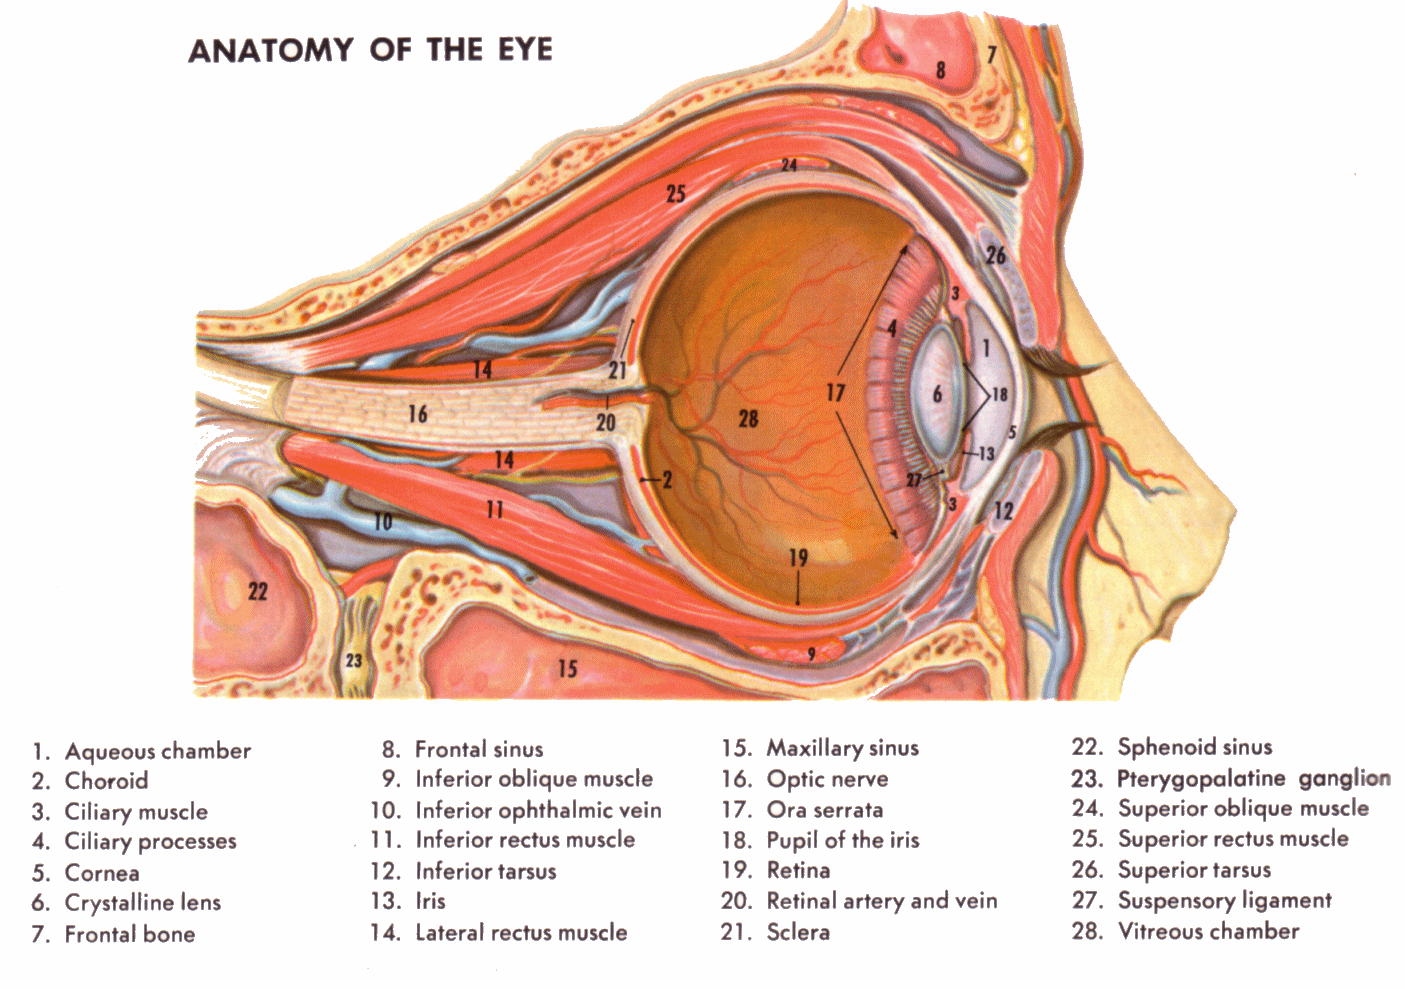 Anatomy of The Human Eye Diagram images